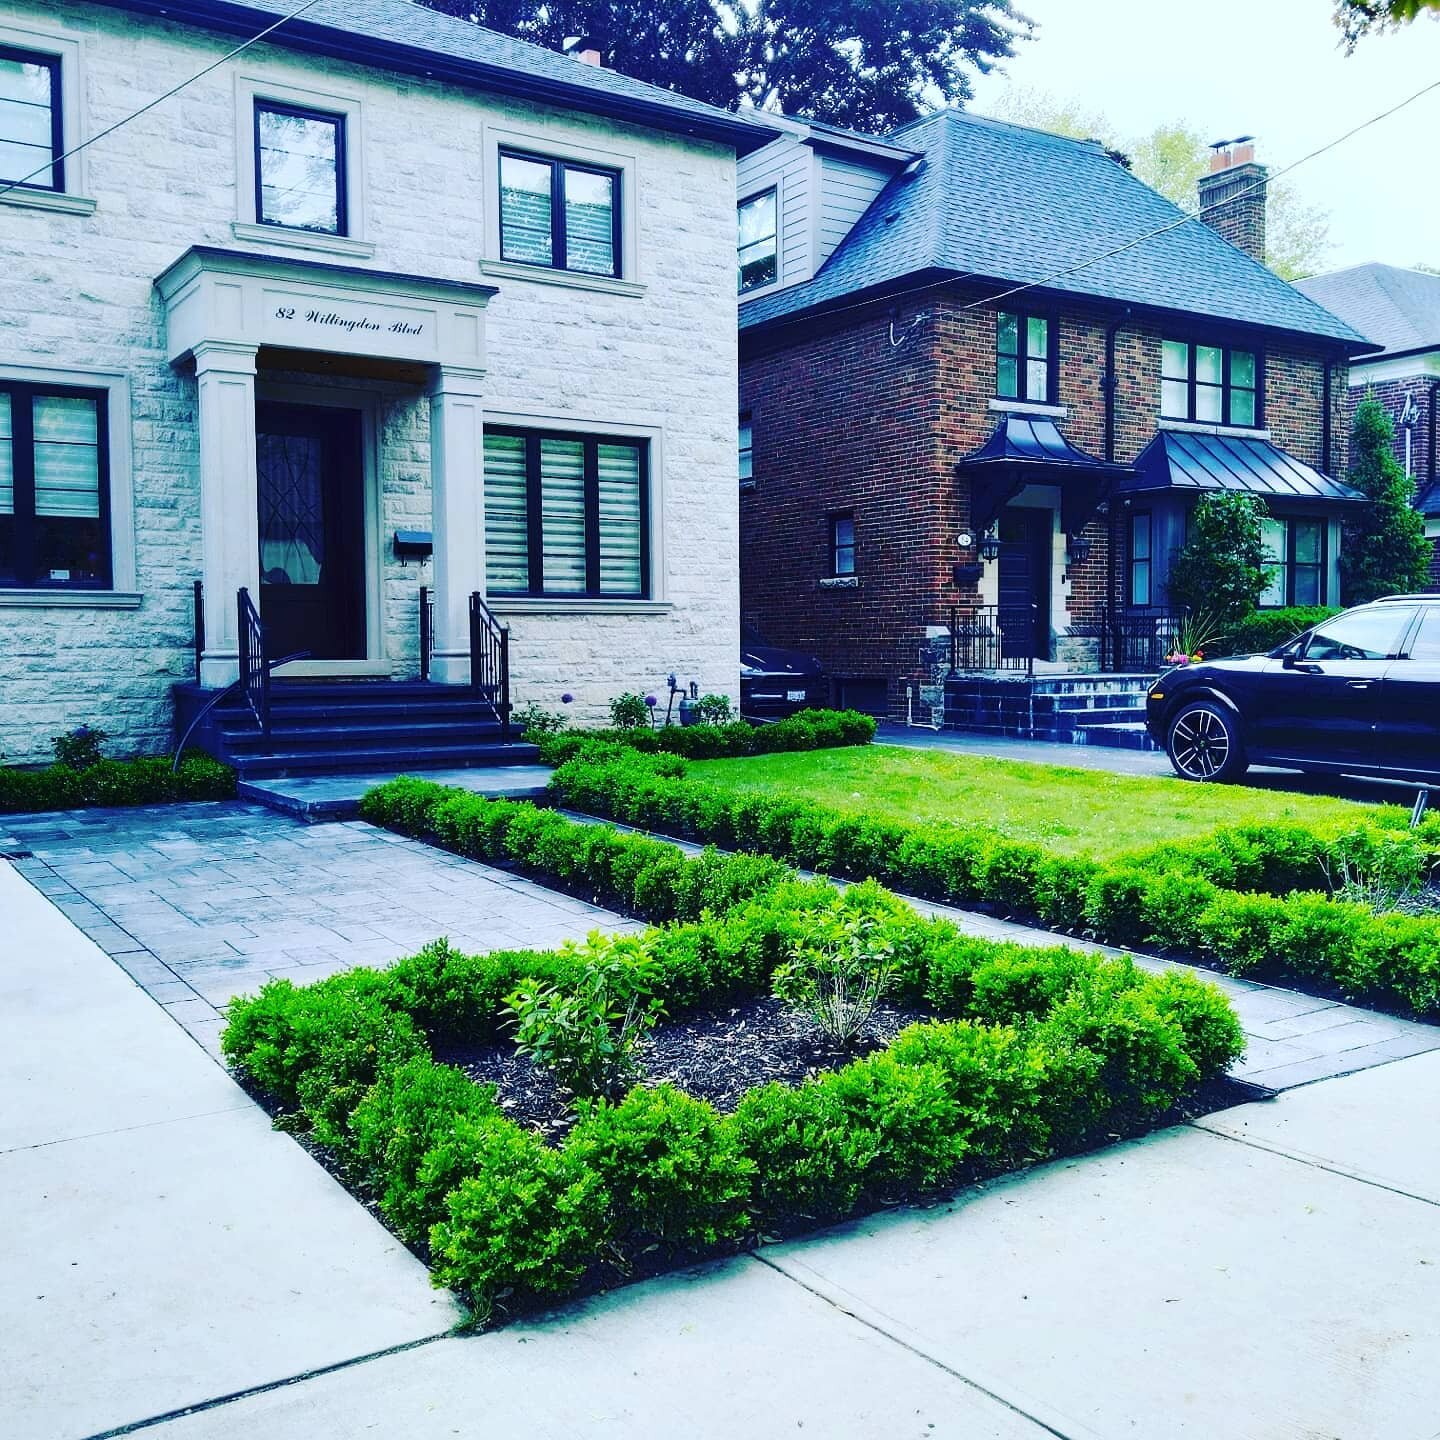 It's the curb appeal for me😎 New front walk way, parking pad &amp; planting. In a couple years these boxwoods will be magnificent hedges👷 #kingsgrovecontracting👊 
.
.
.
.
#boxwoods #landscapersofinstagram #hardscapersofinstagram #landscape #landsc